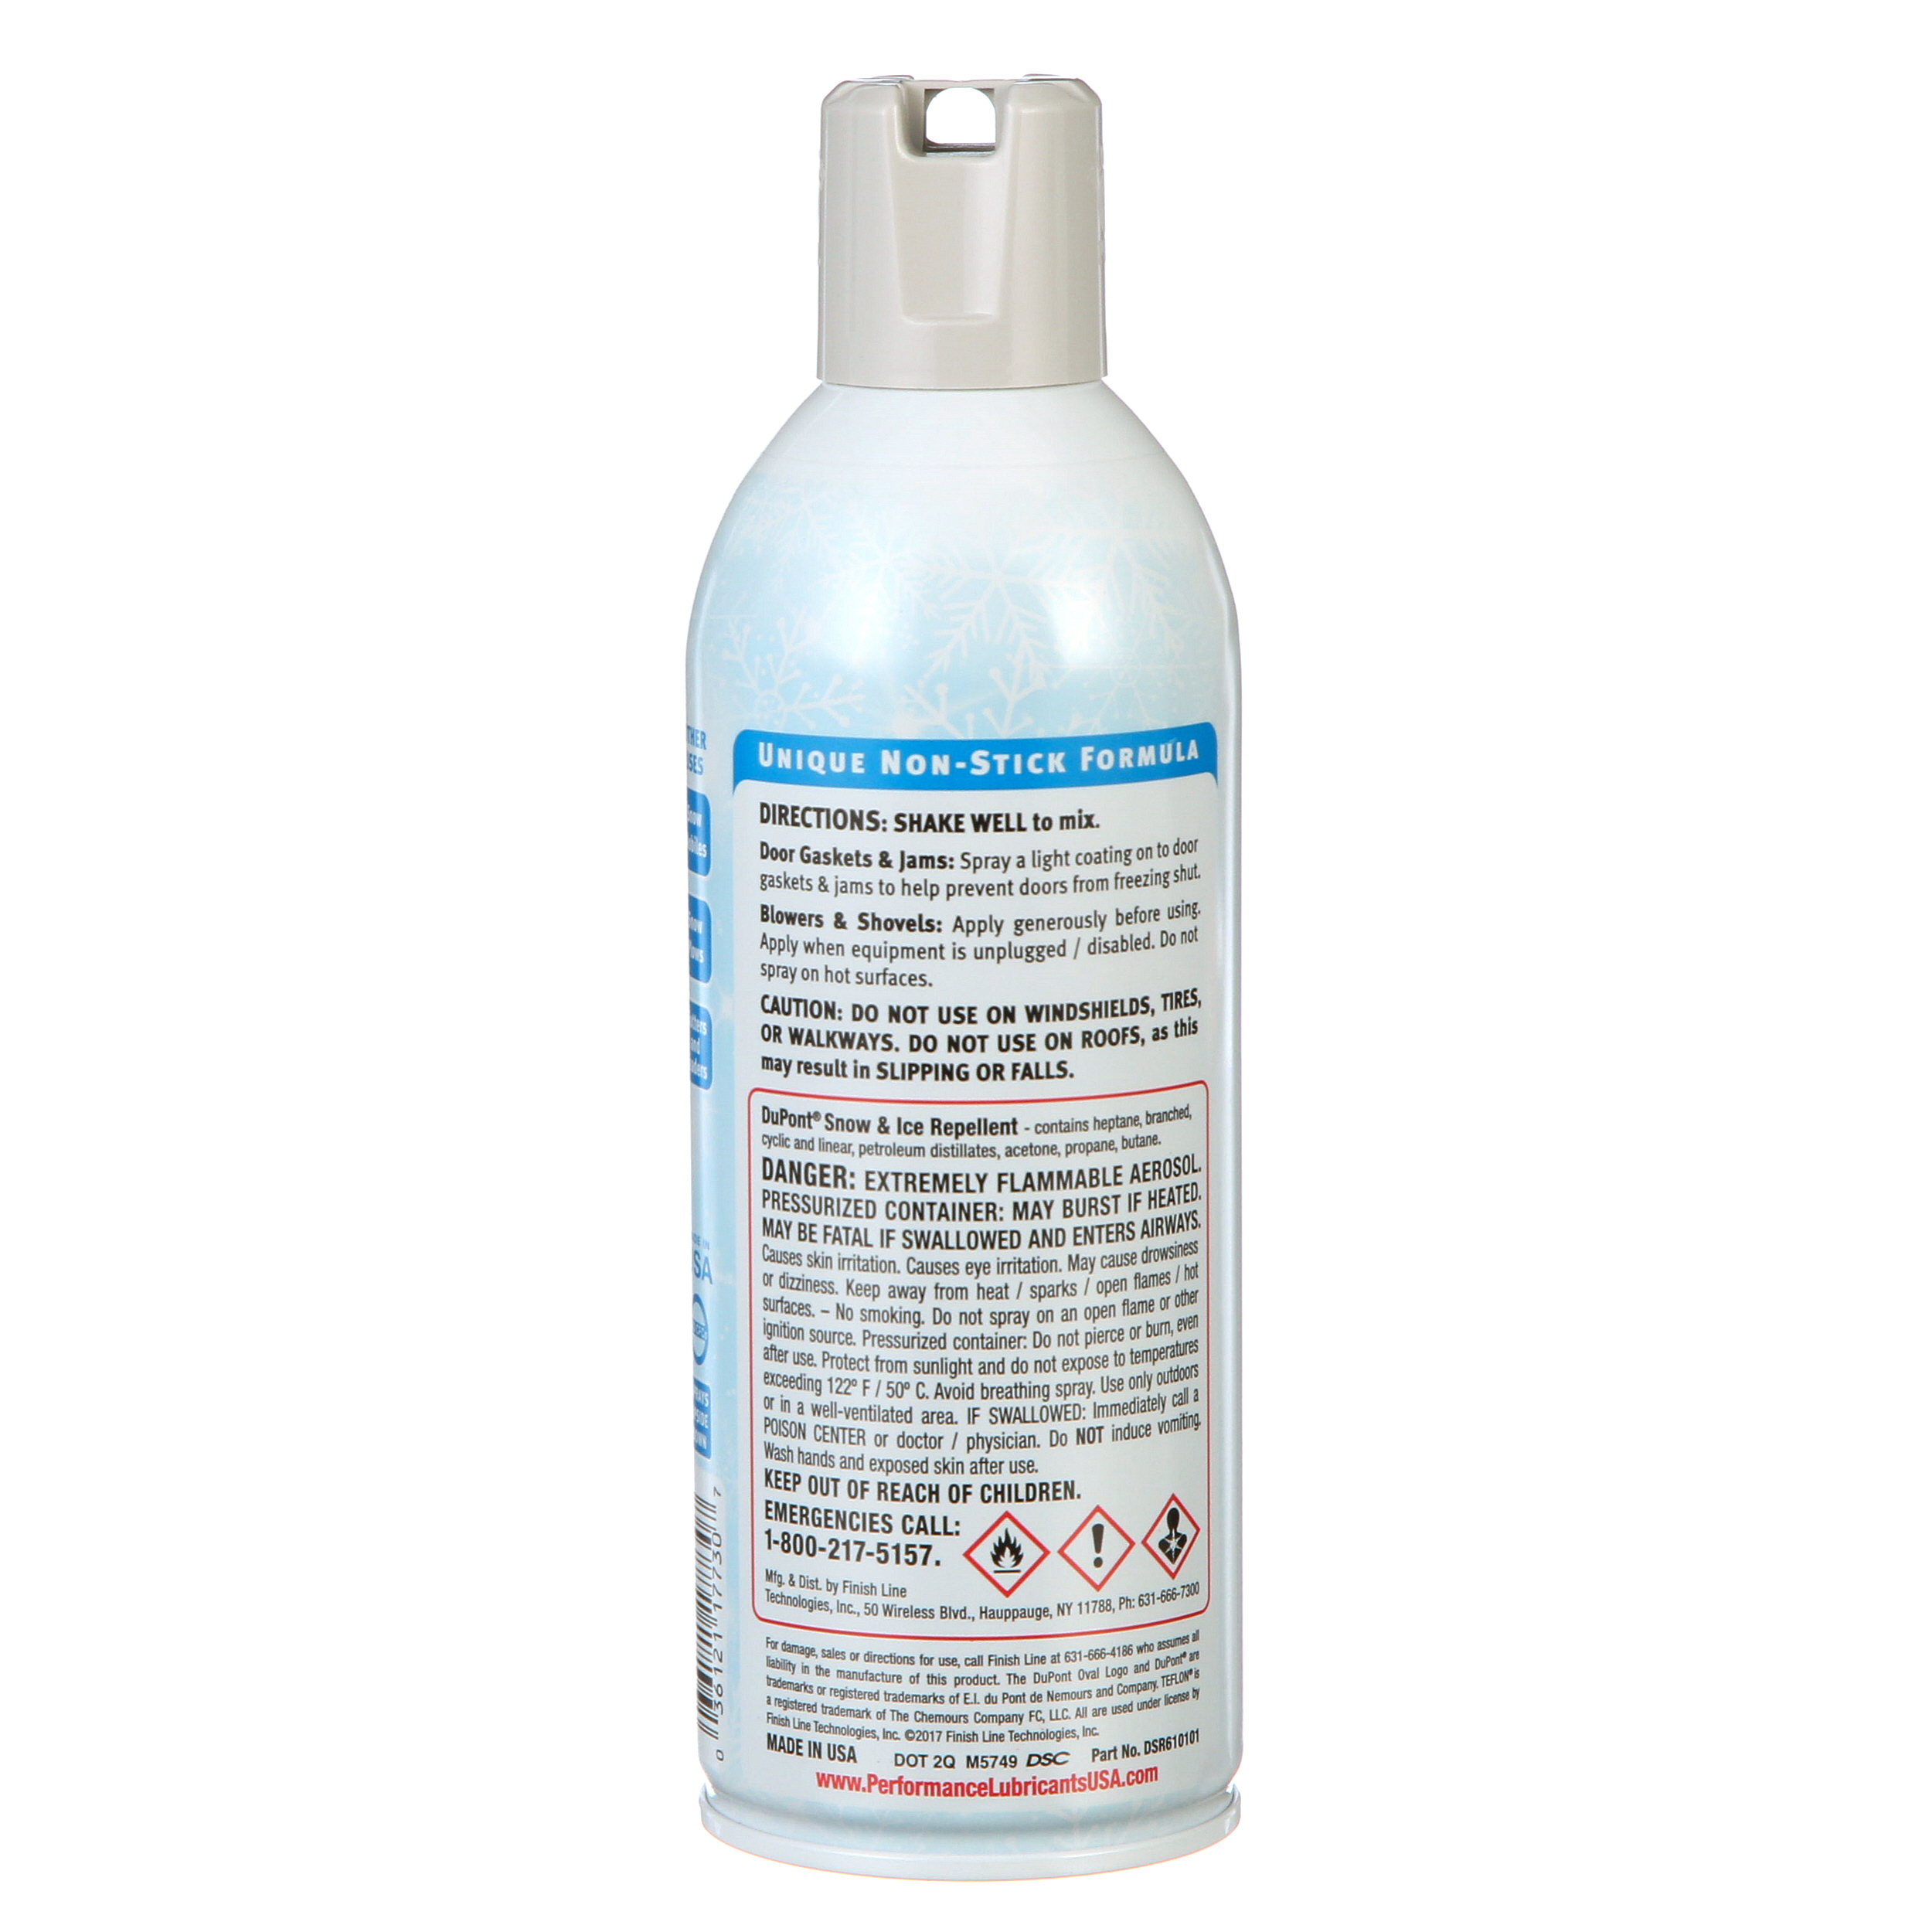 DuPont Sprayer Snow and Ice Repellent 10 oz 1 pk - image 4 of 5